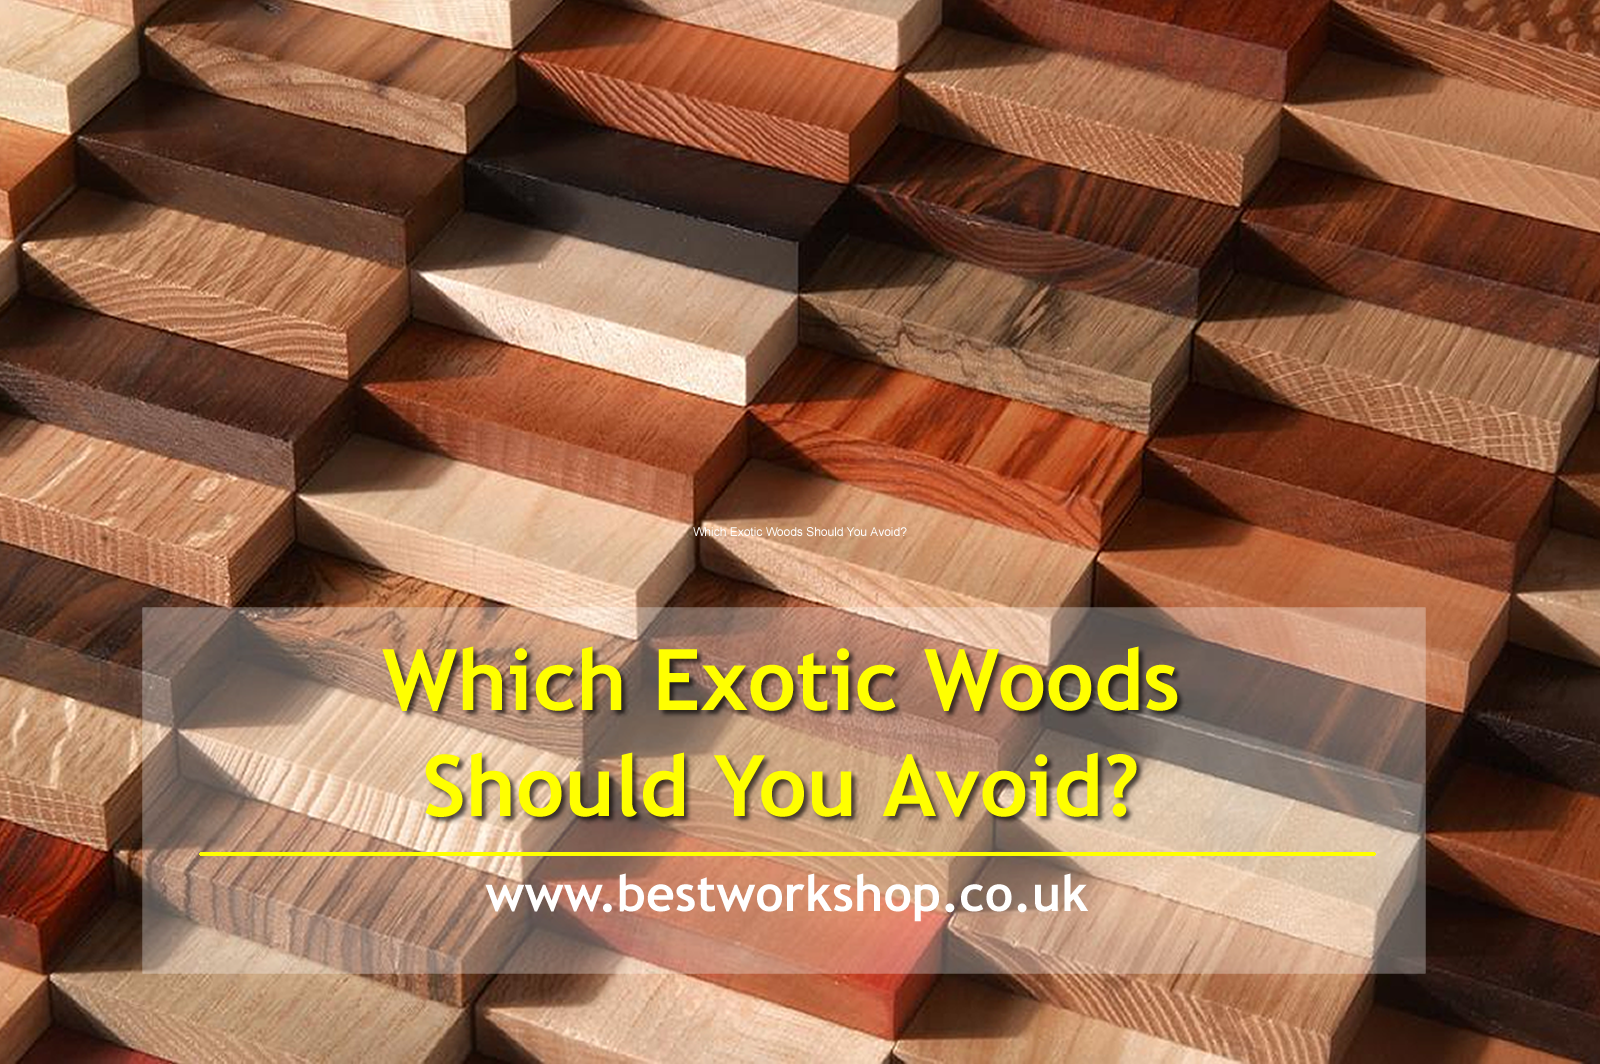 Which Exotic Woods Should You Avoid?